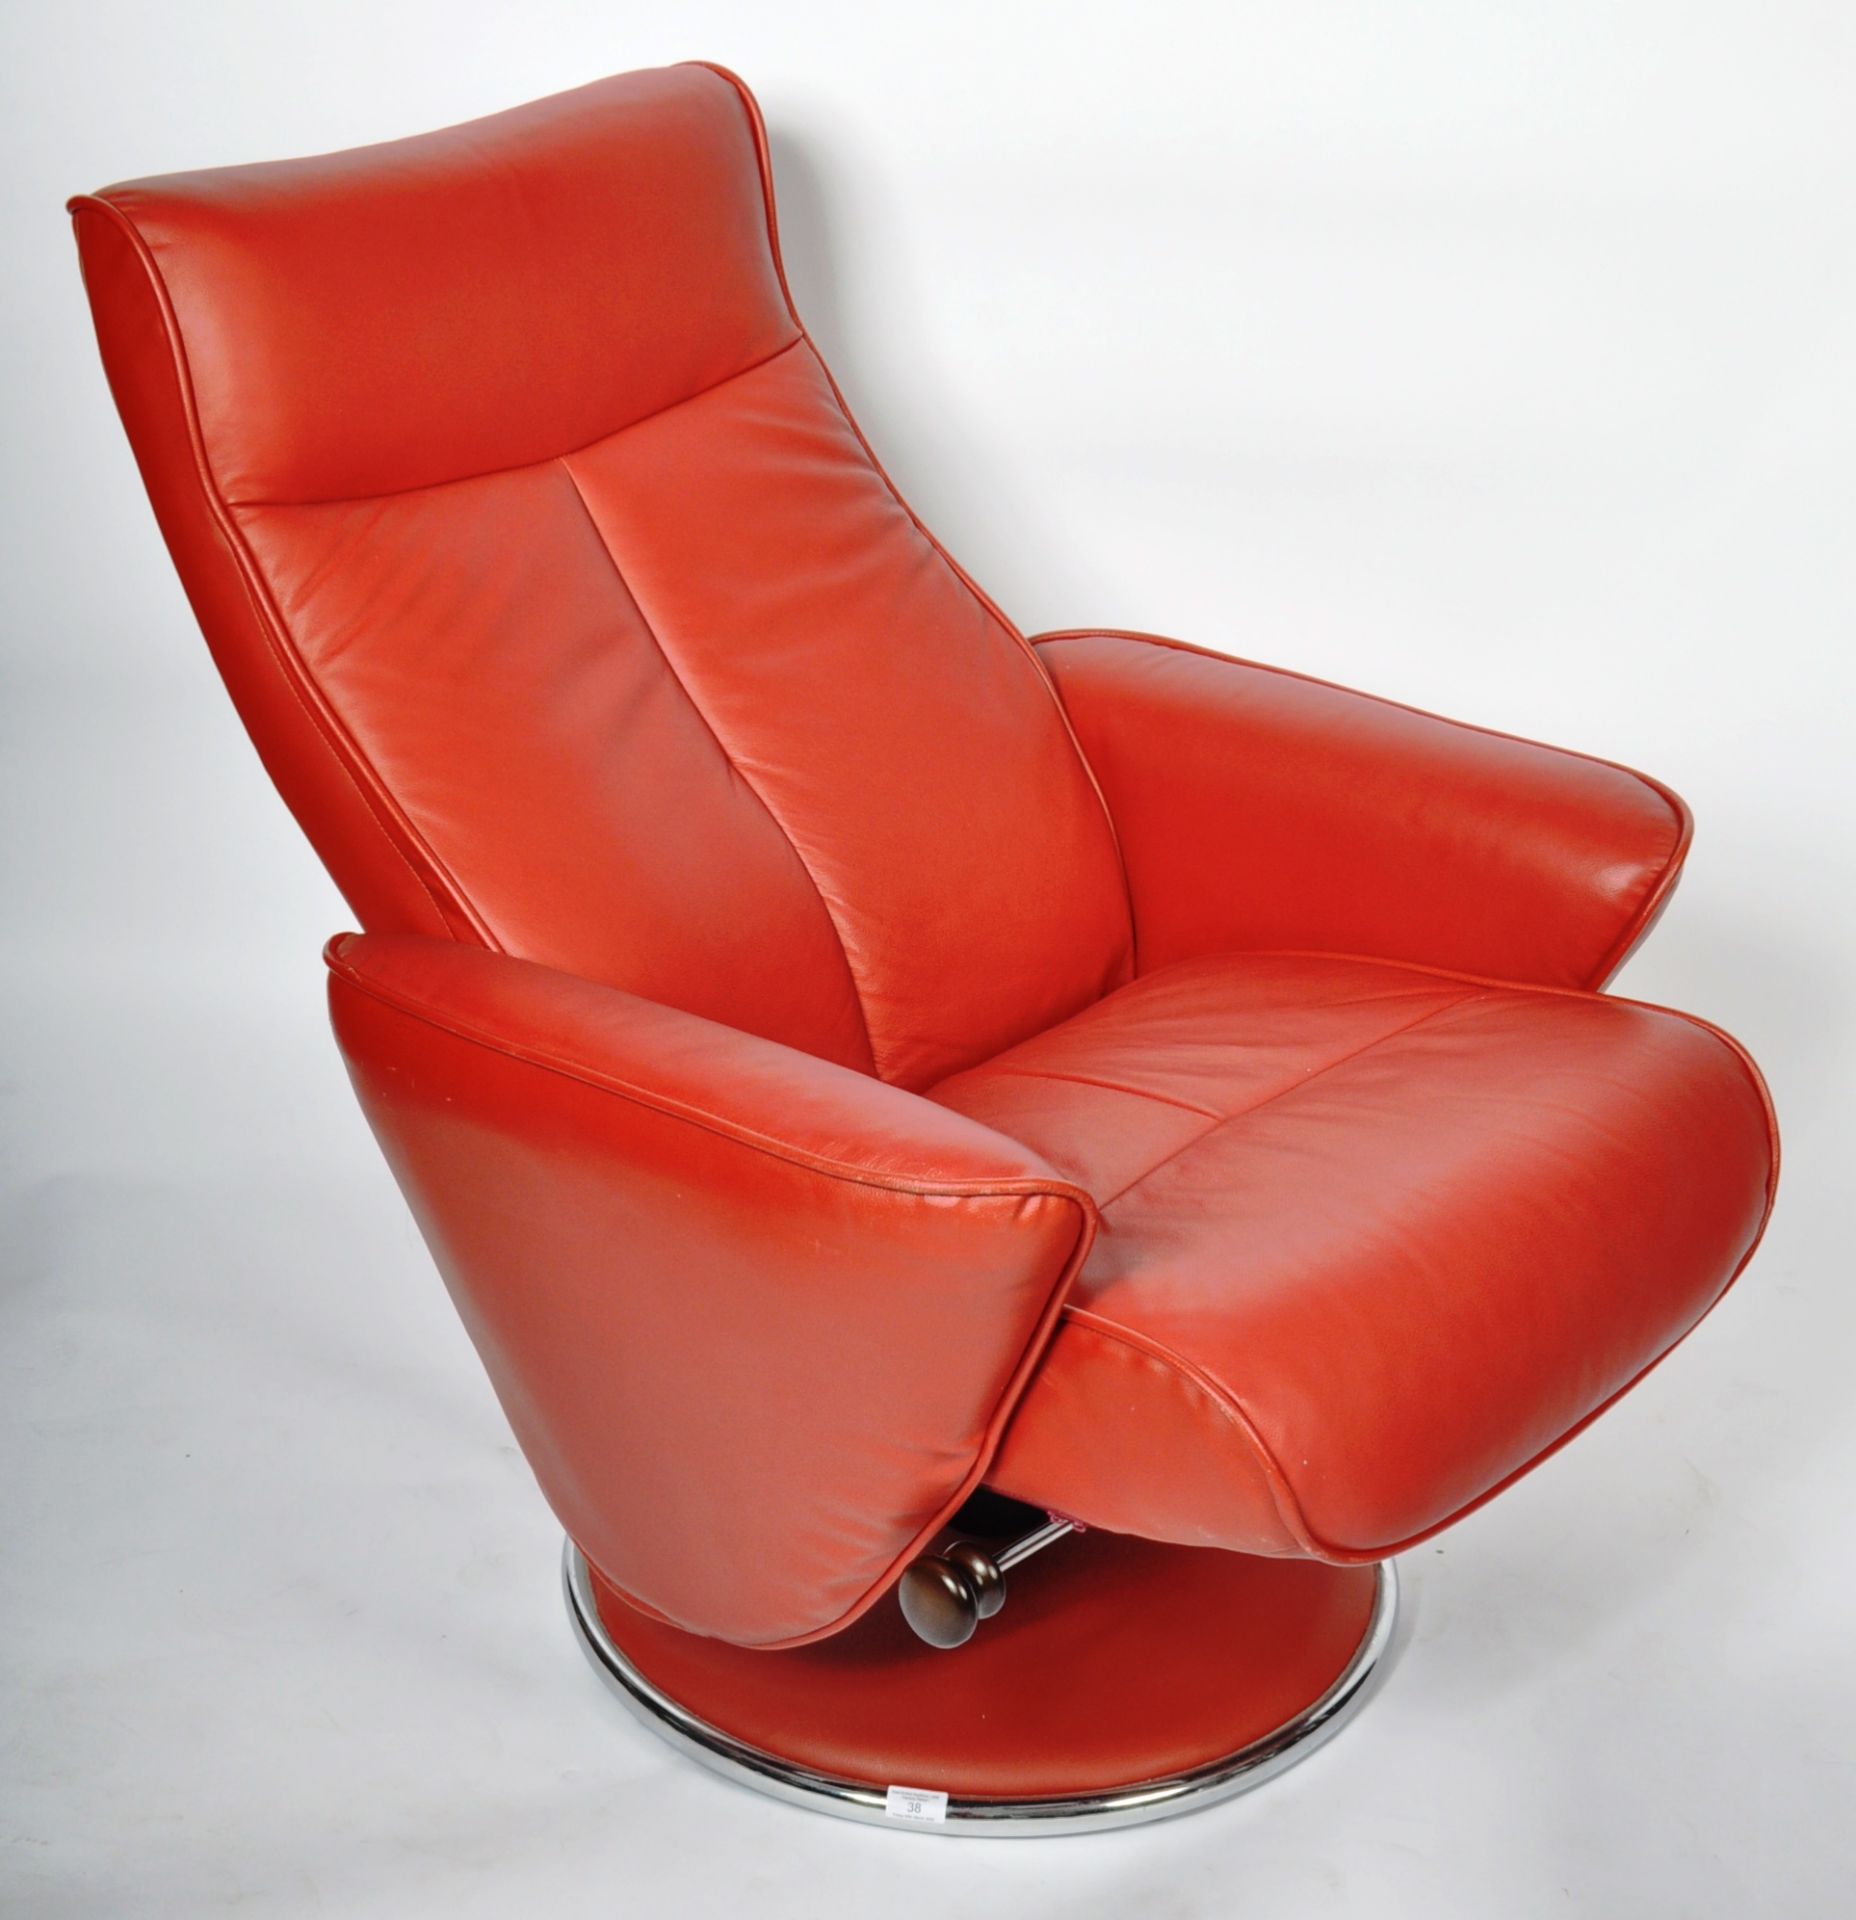 G PLAN - CONTEMPORARY RED LEATHER RECLINING SWIVEL ARMCHAIR - Image 7 of 7